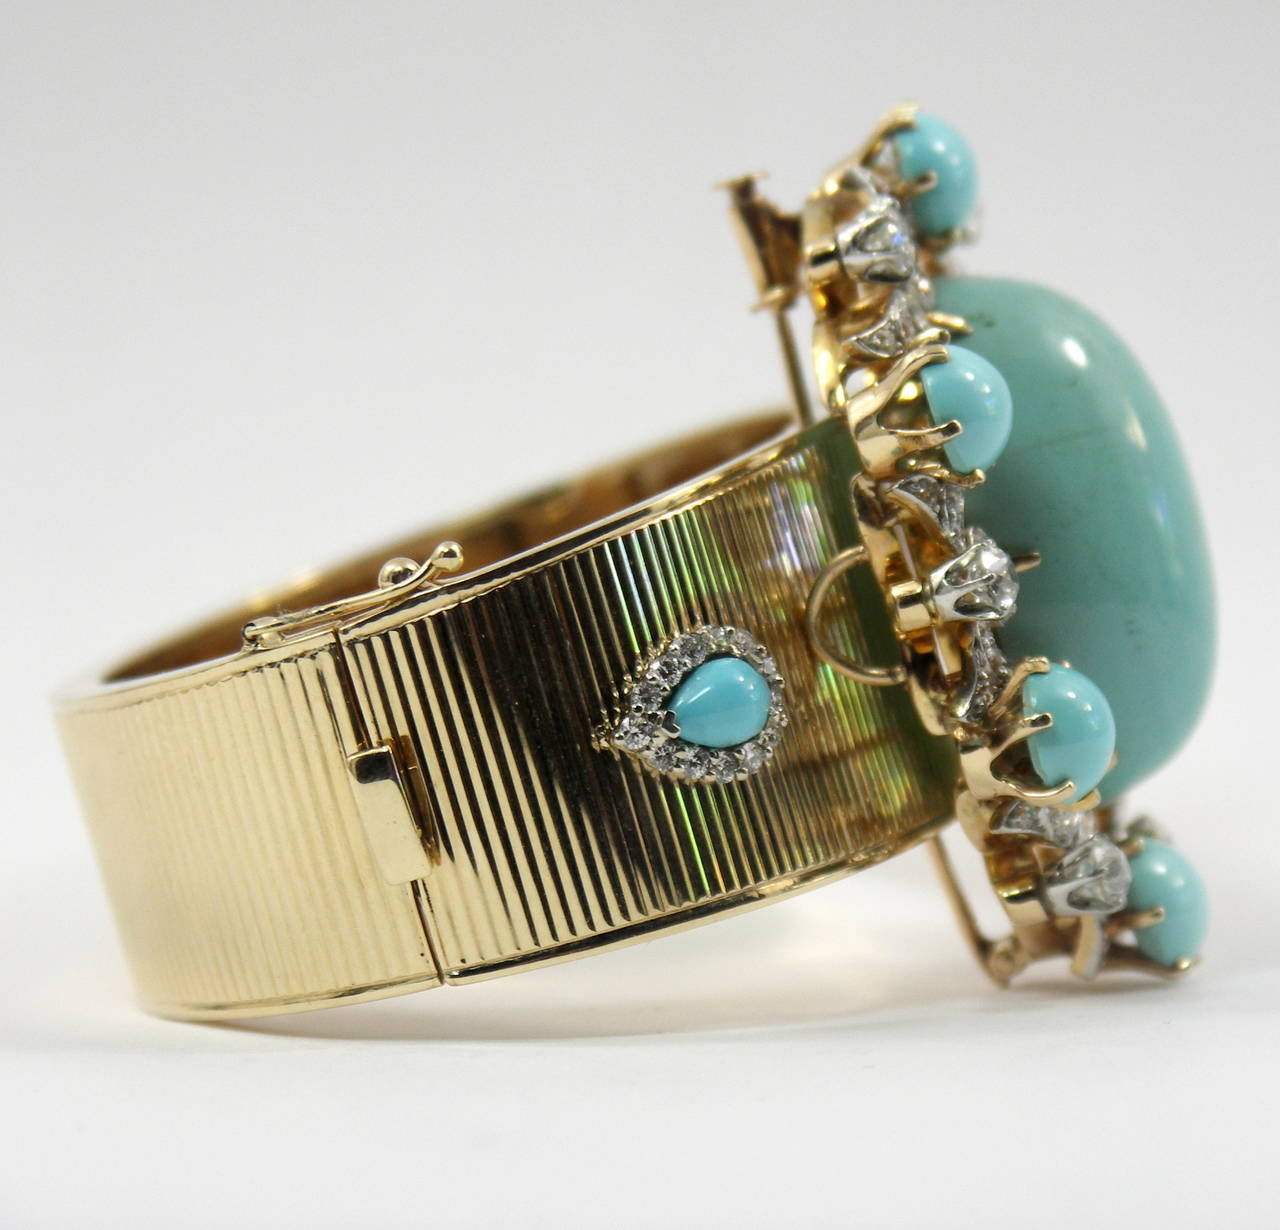 A 14K yellow gold corrugated design bangle bracelet, set with two pear-shaped turquoise and 26 round brilliant cut diamonds. This bracelet is embellished with a Victorian era brooch. Constructed with an 18K yellow gold frame it features a platinum